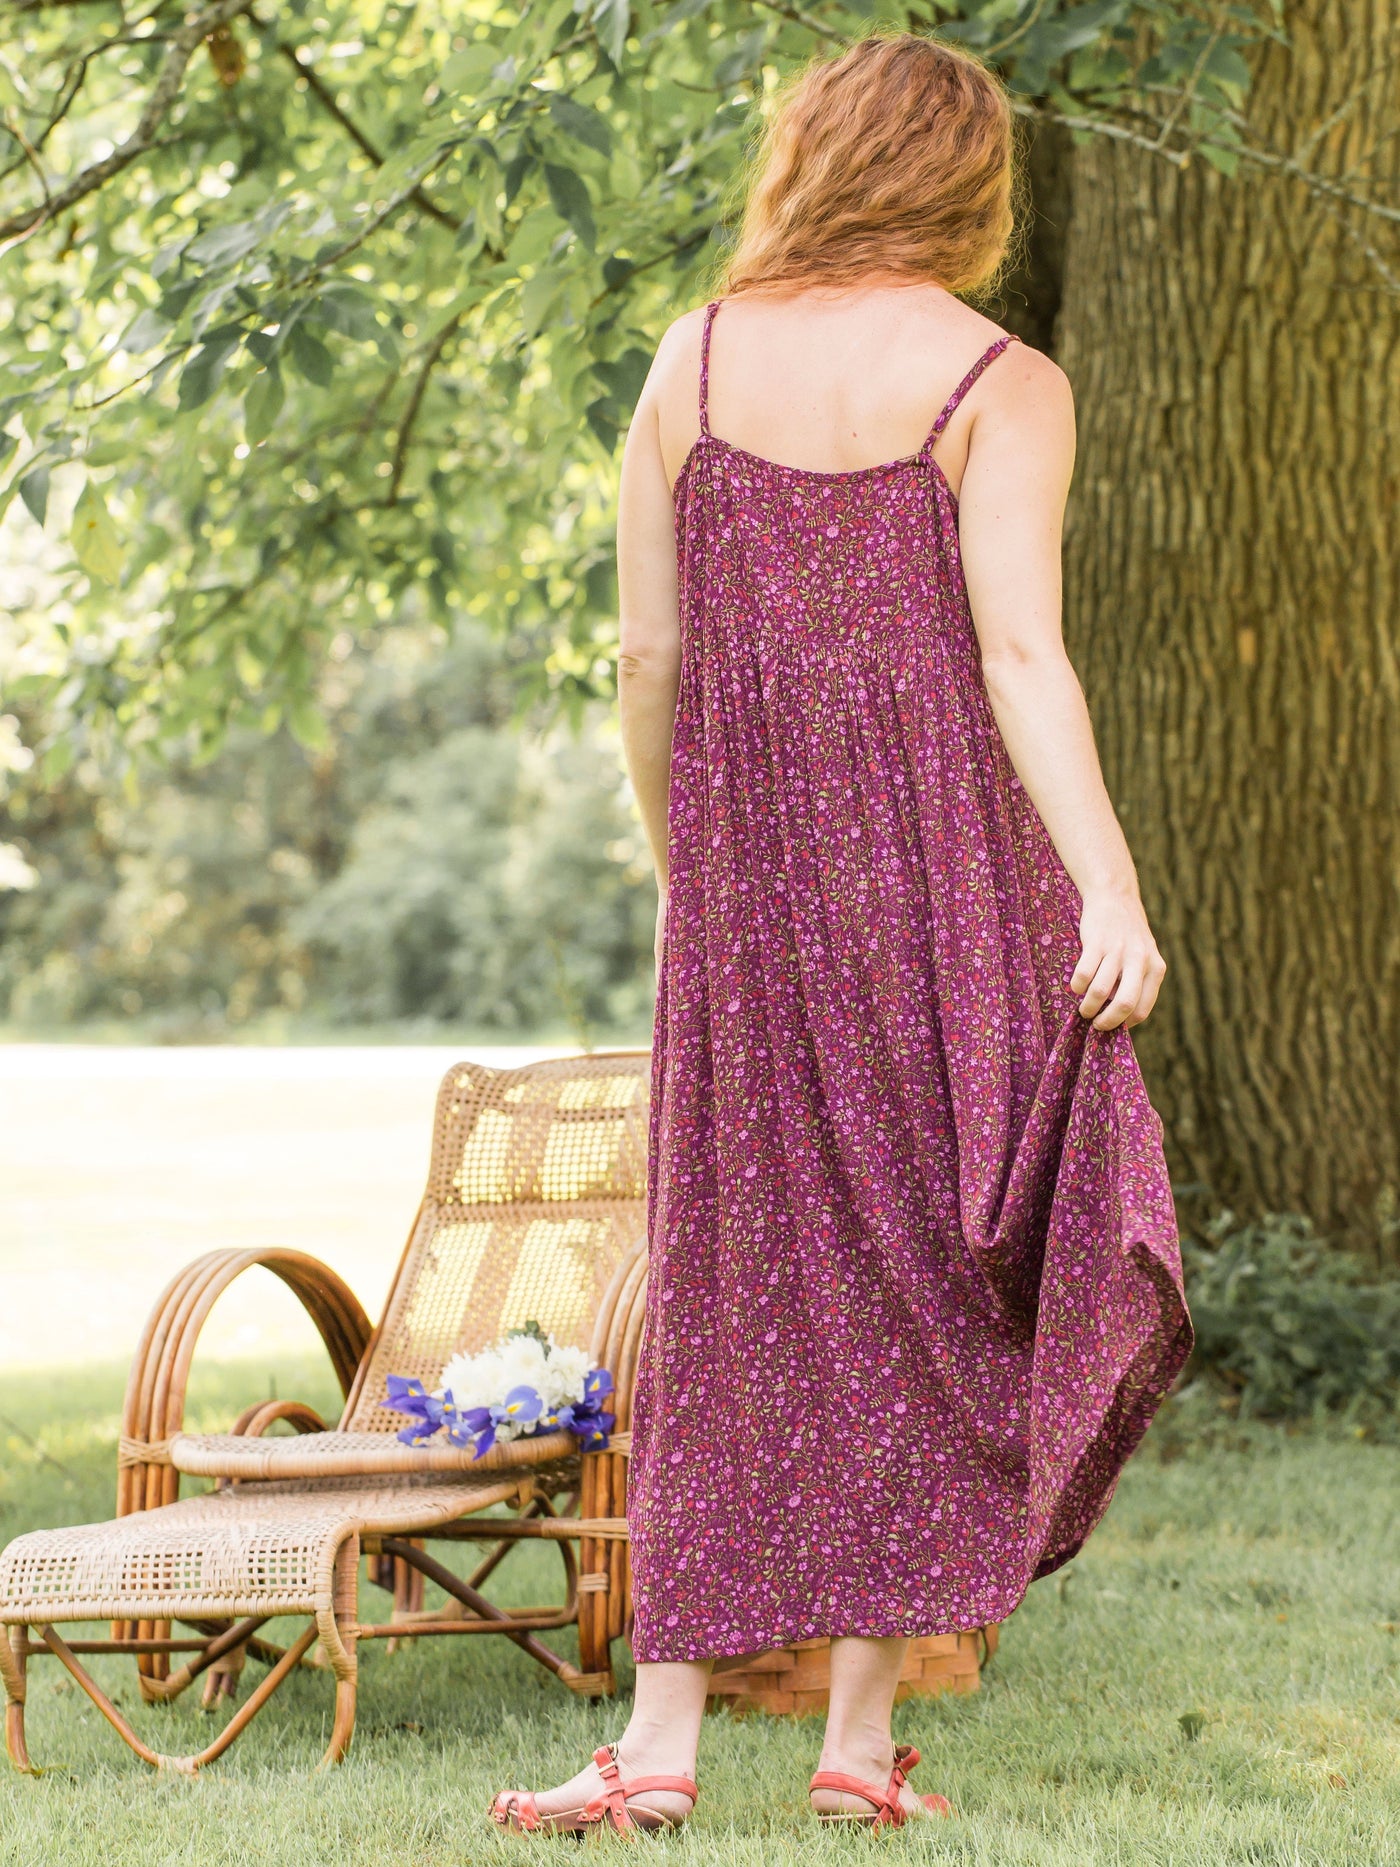 Romantic Courtyard Dress in Purple | April Cornell - SOLD OUT